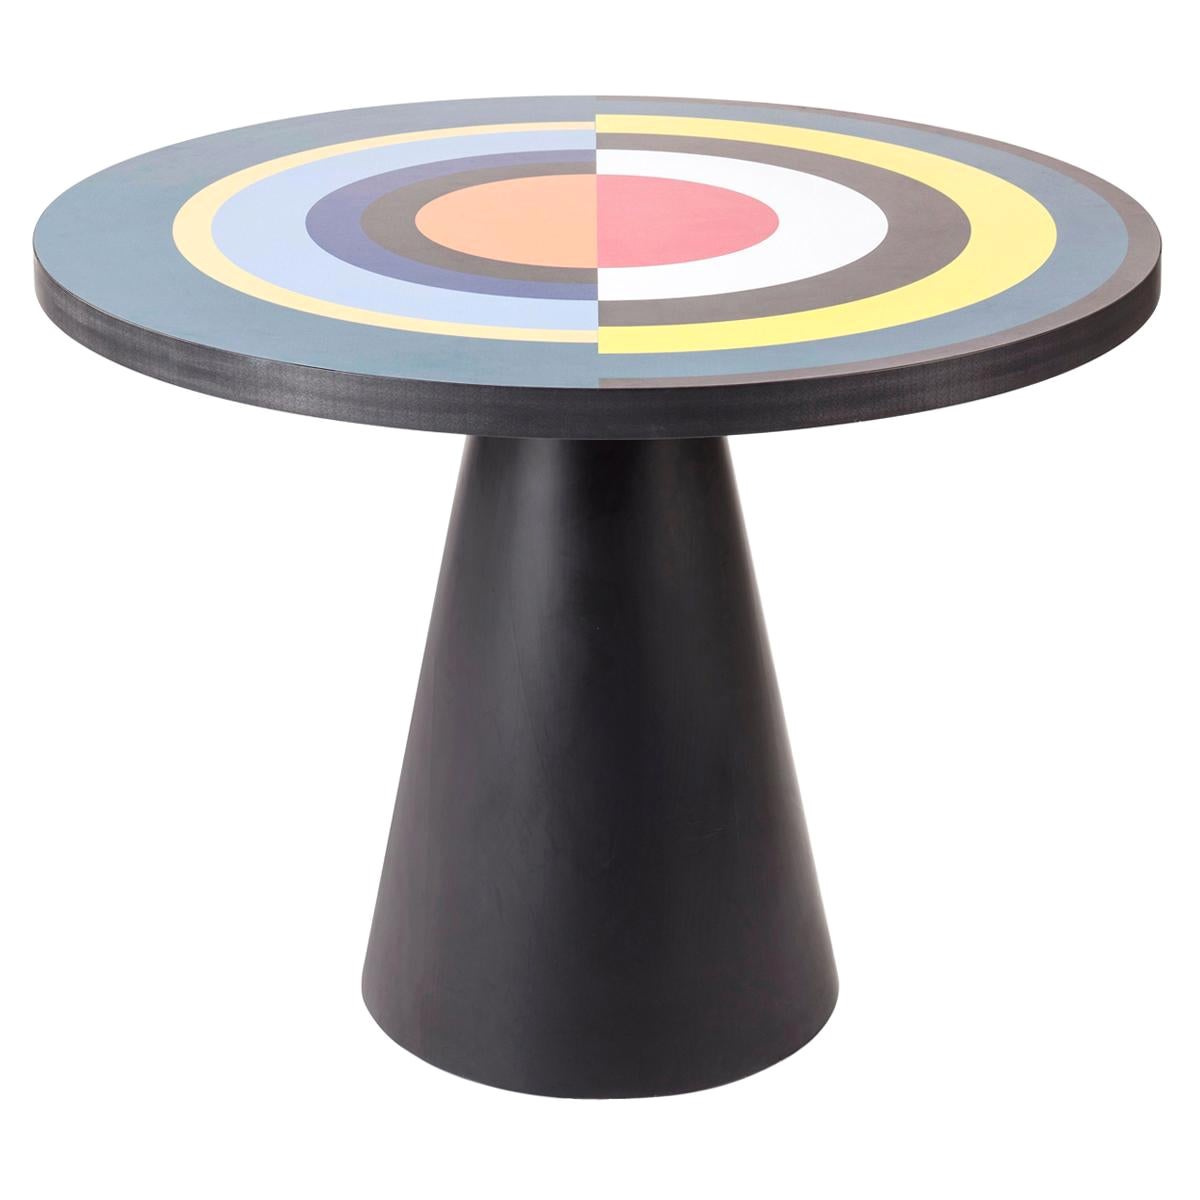 Homage to Delaunay Dining Table by Thomas Dariel For Sale